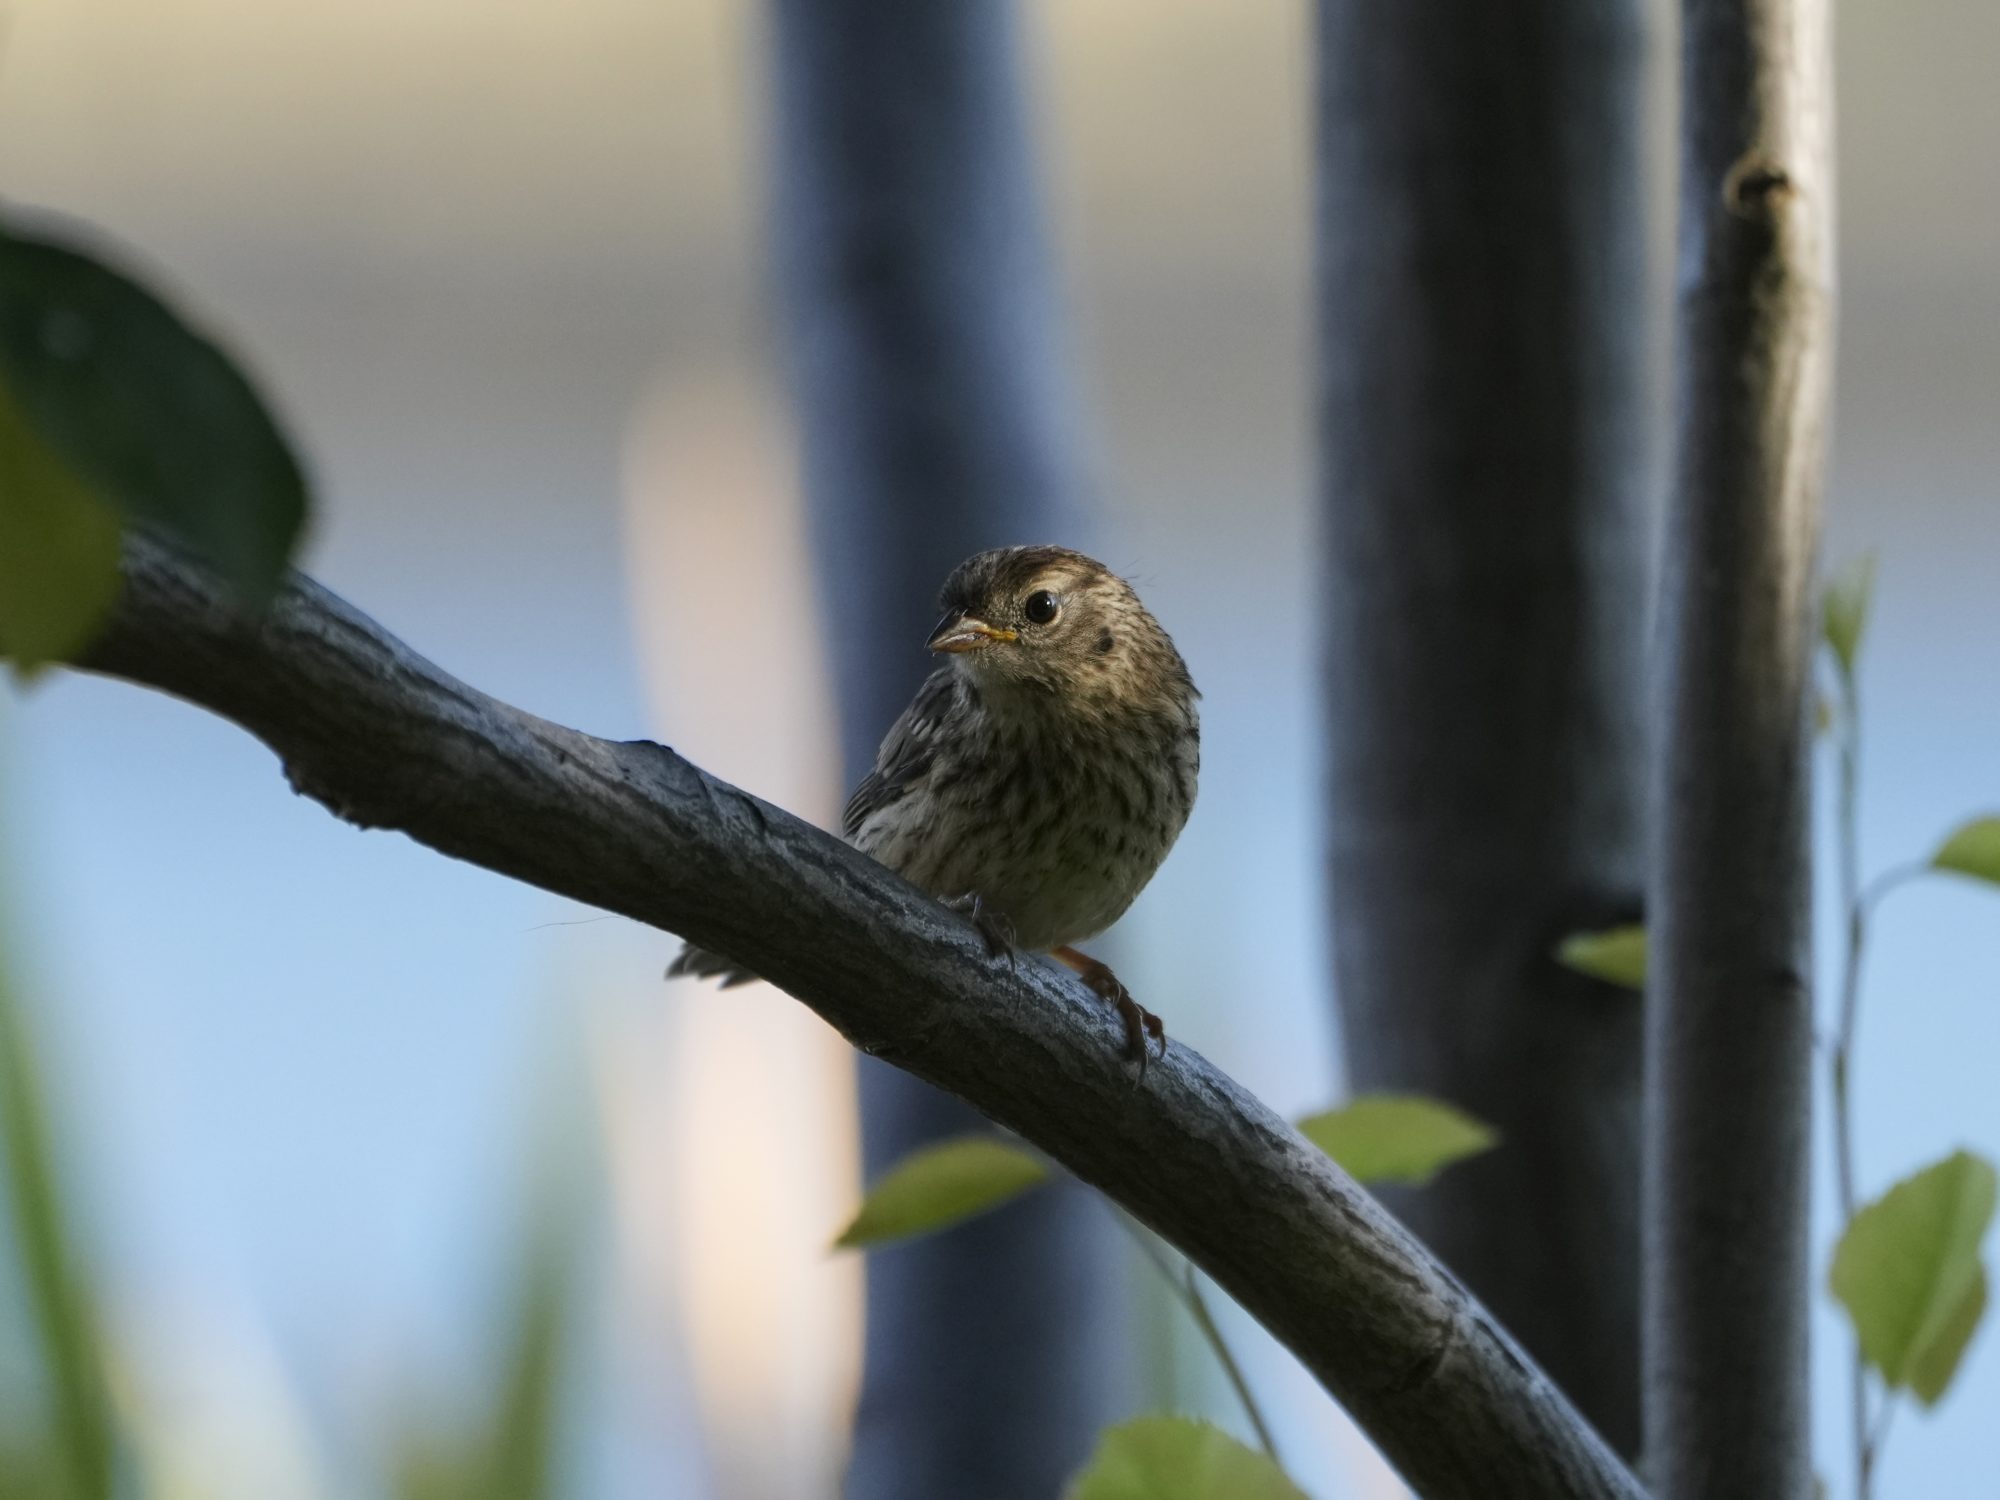 An immature White-crowned Sparrow is on a branch in deep shadow. Its face is somewhat more brightly lit